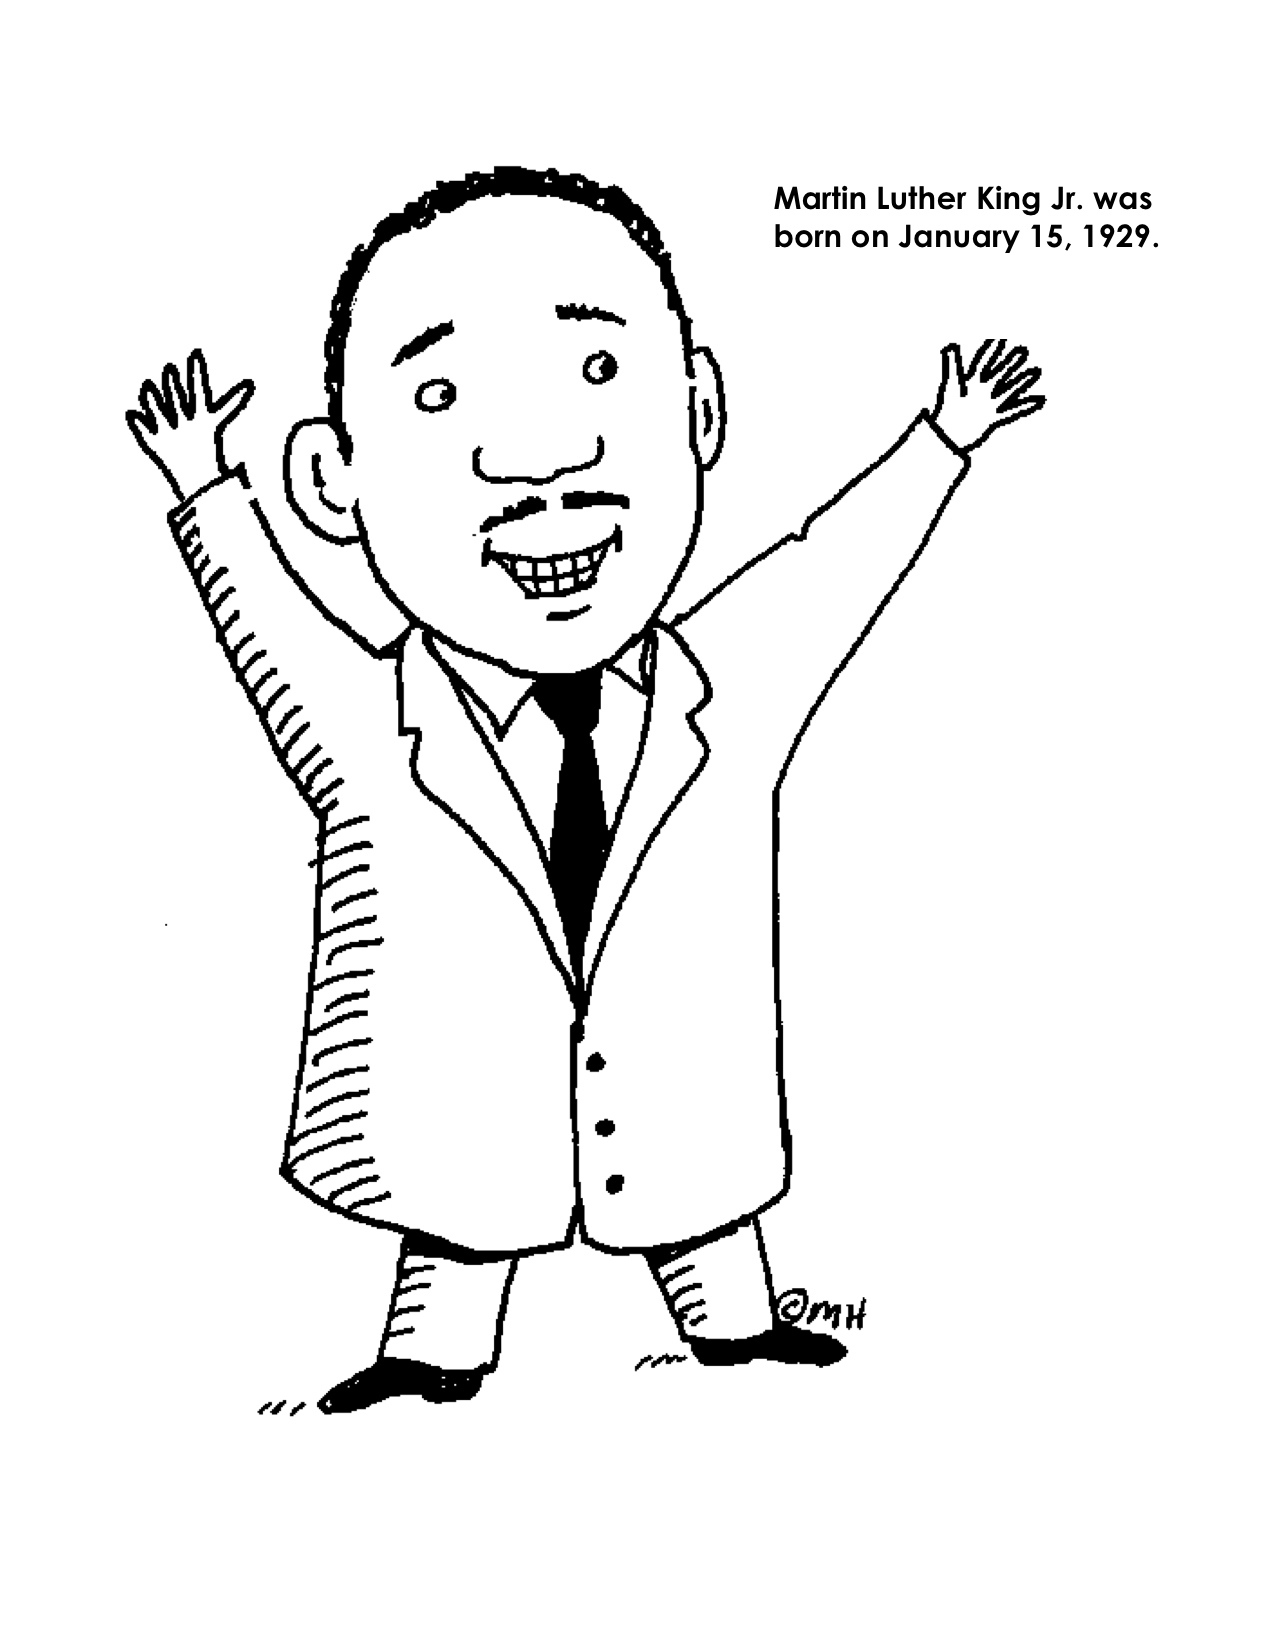 Coloring Pages : Free Printable Colorings For Martin Luther King Jr - Martin Luther King Free Printable Coloring Pages